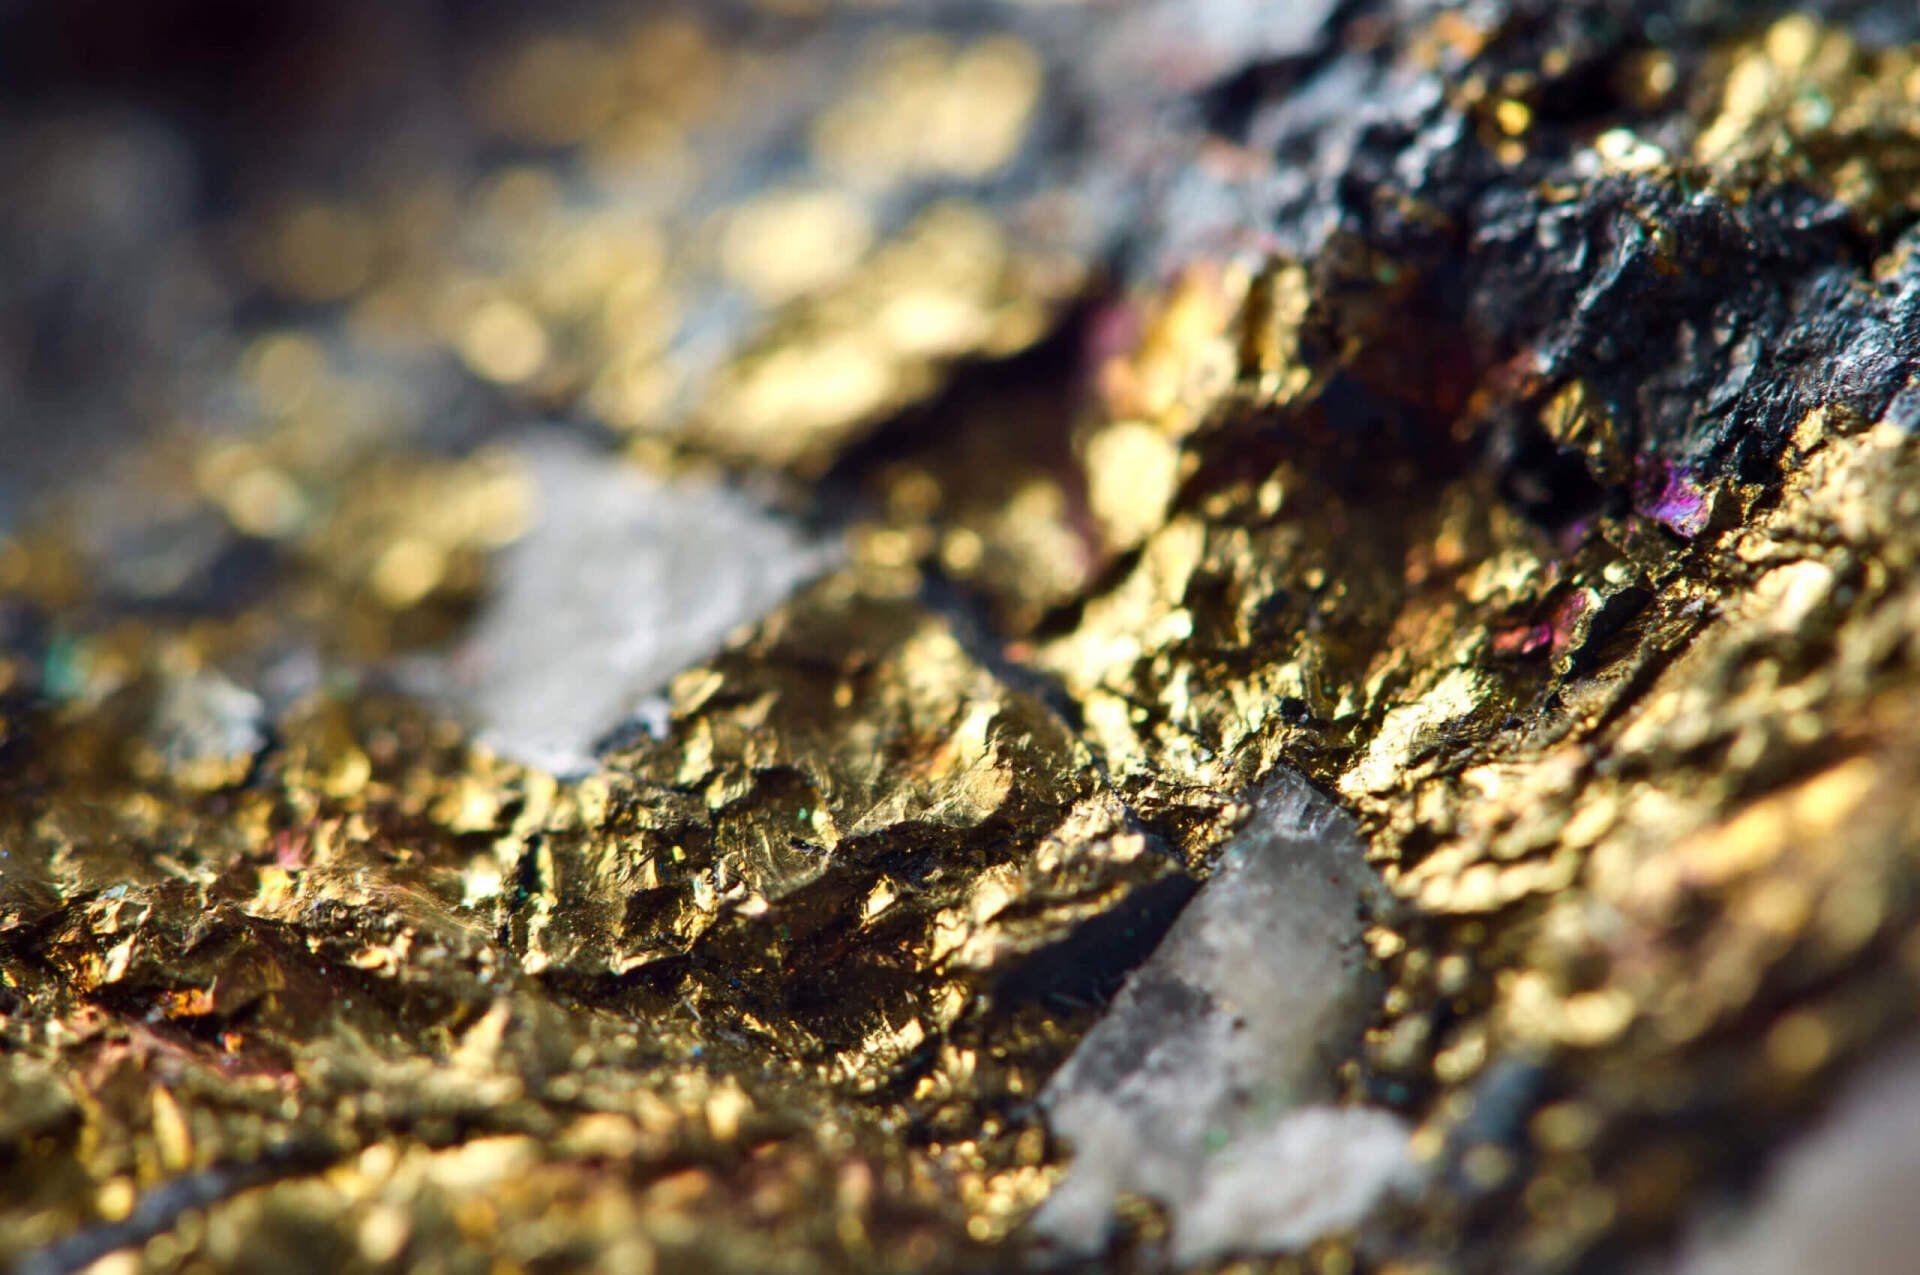 Up close image of gold